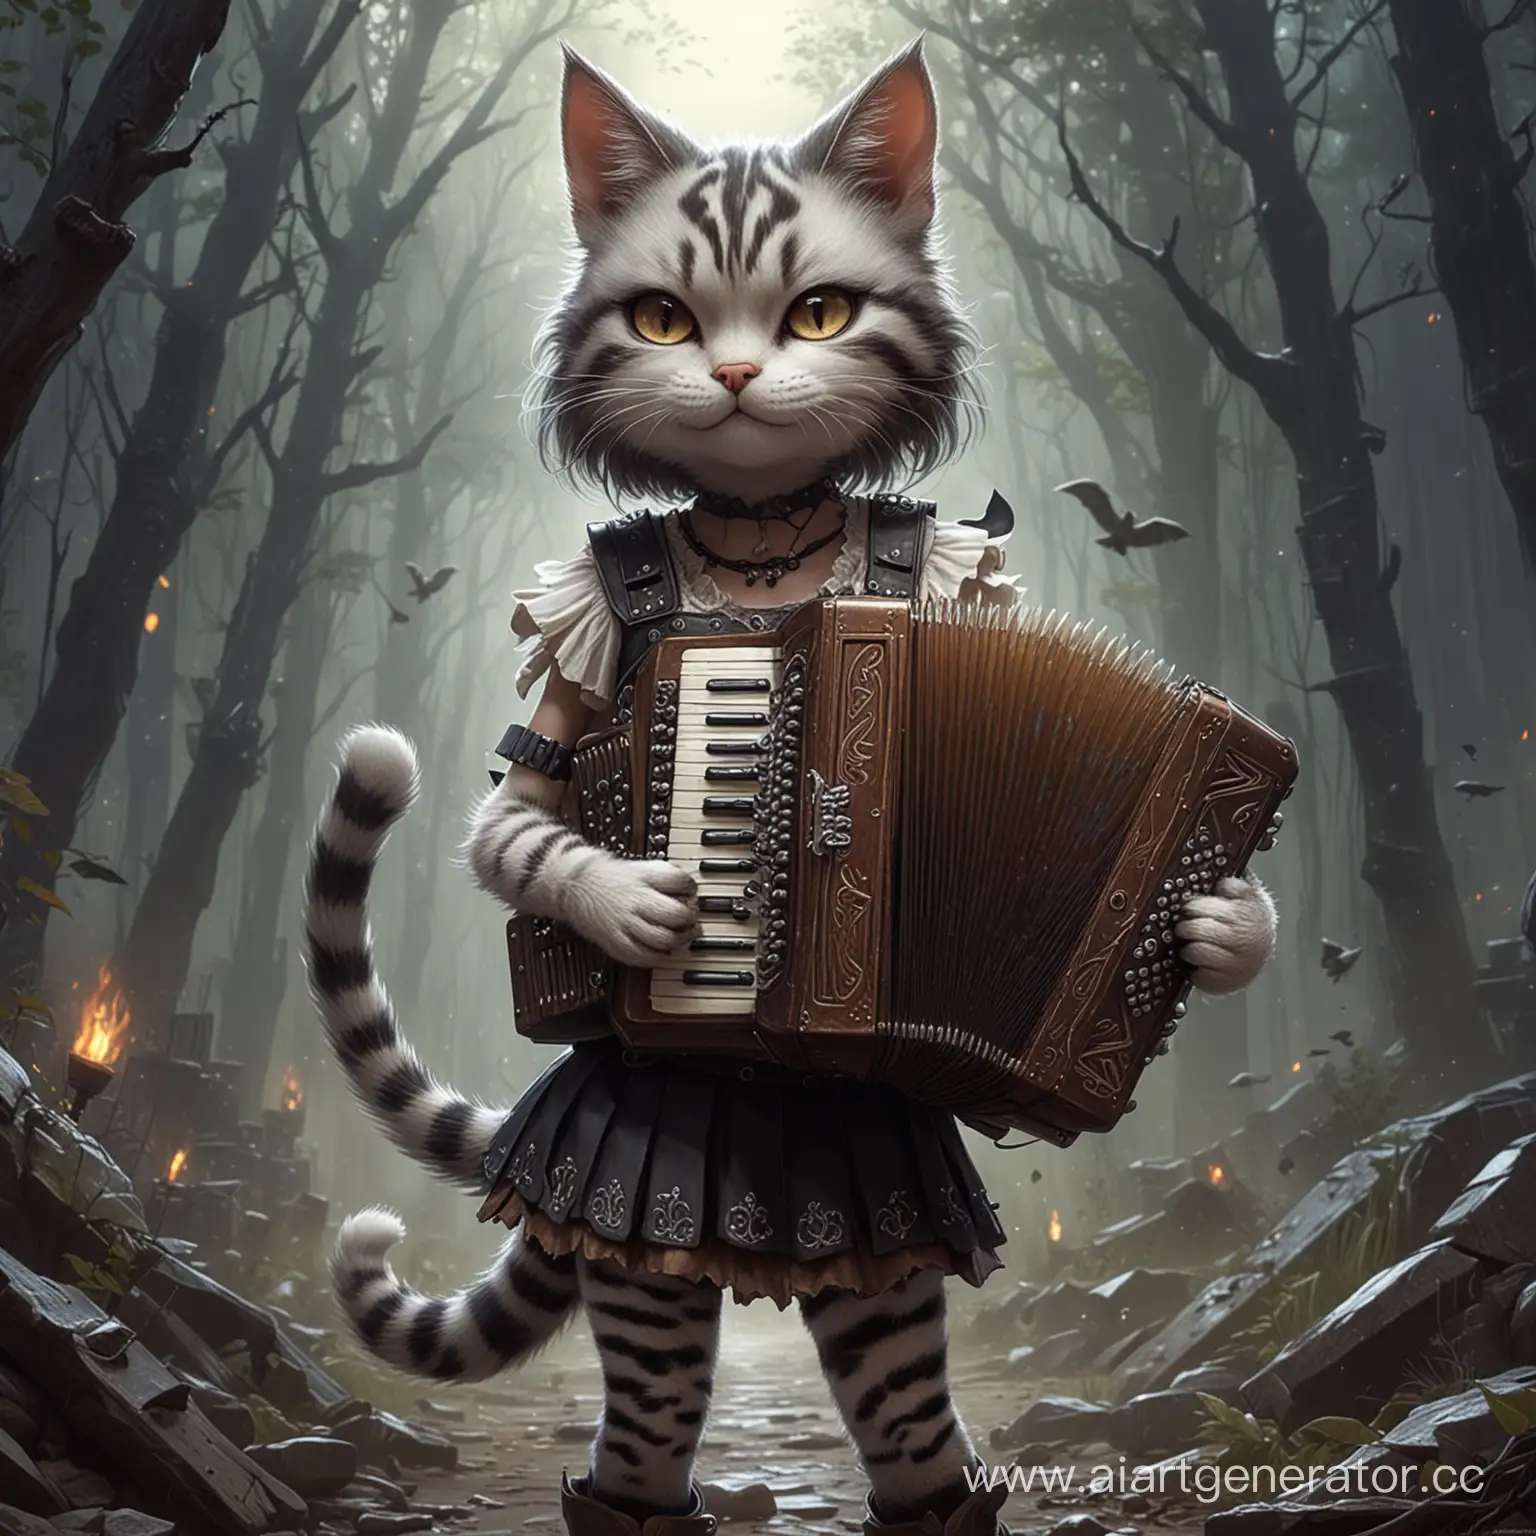 Fury-Cat-Girl-Playing-the-Accordion-in-a-Fantasy-World